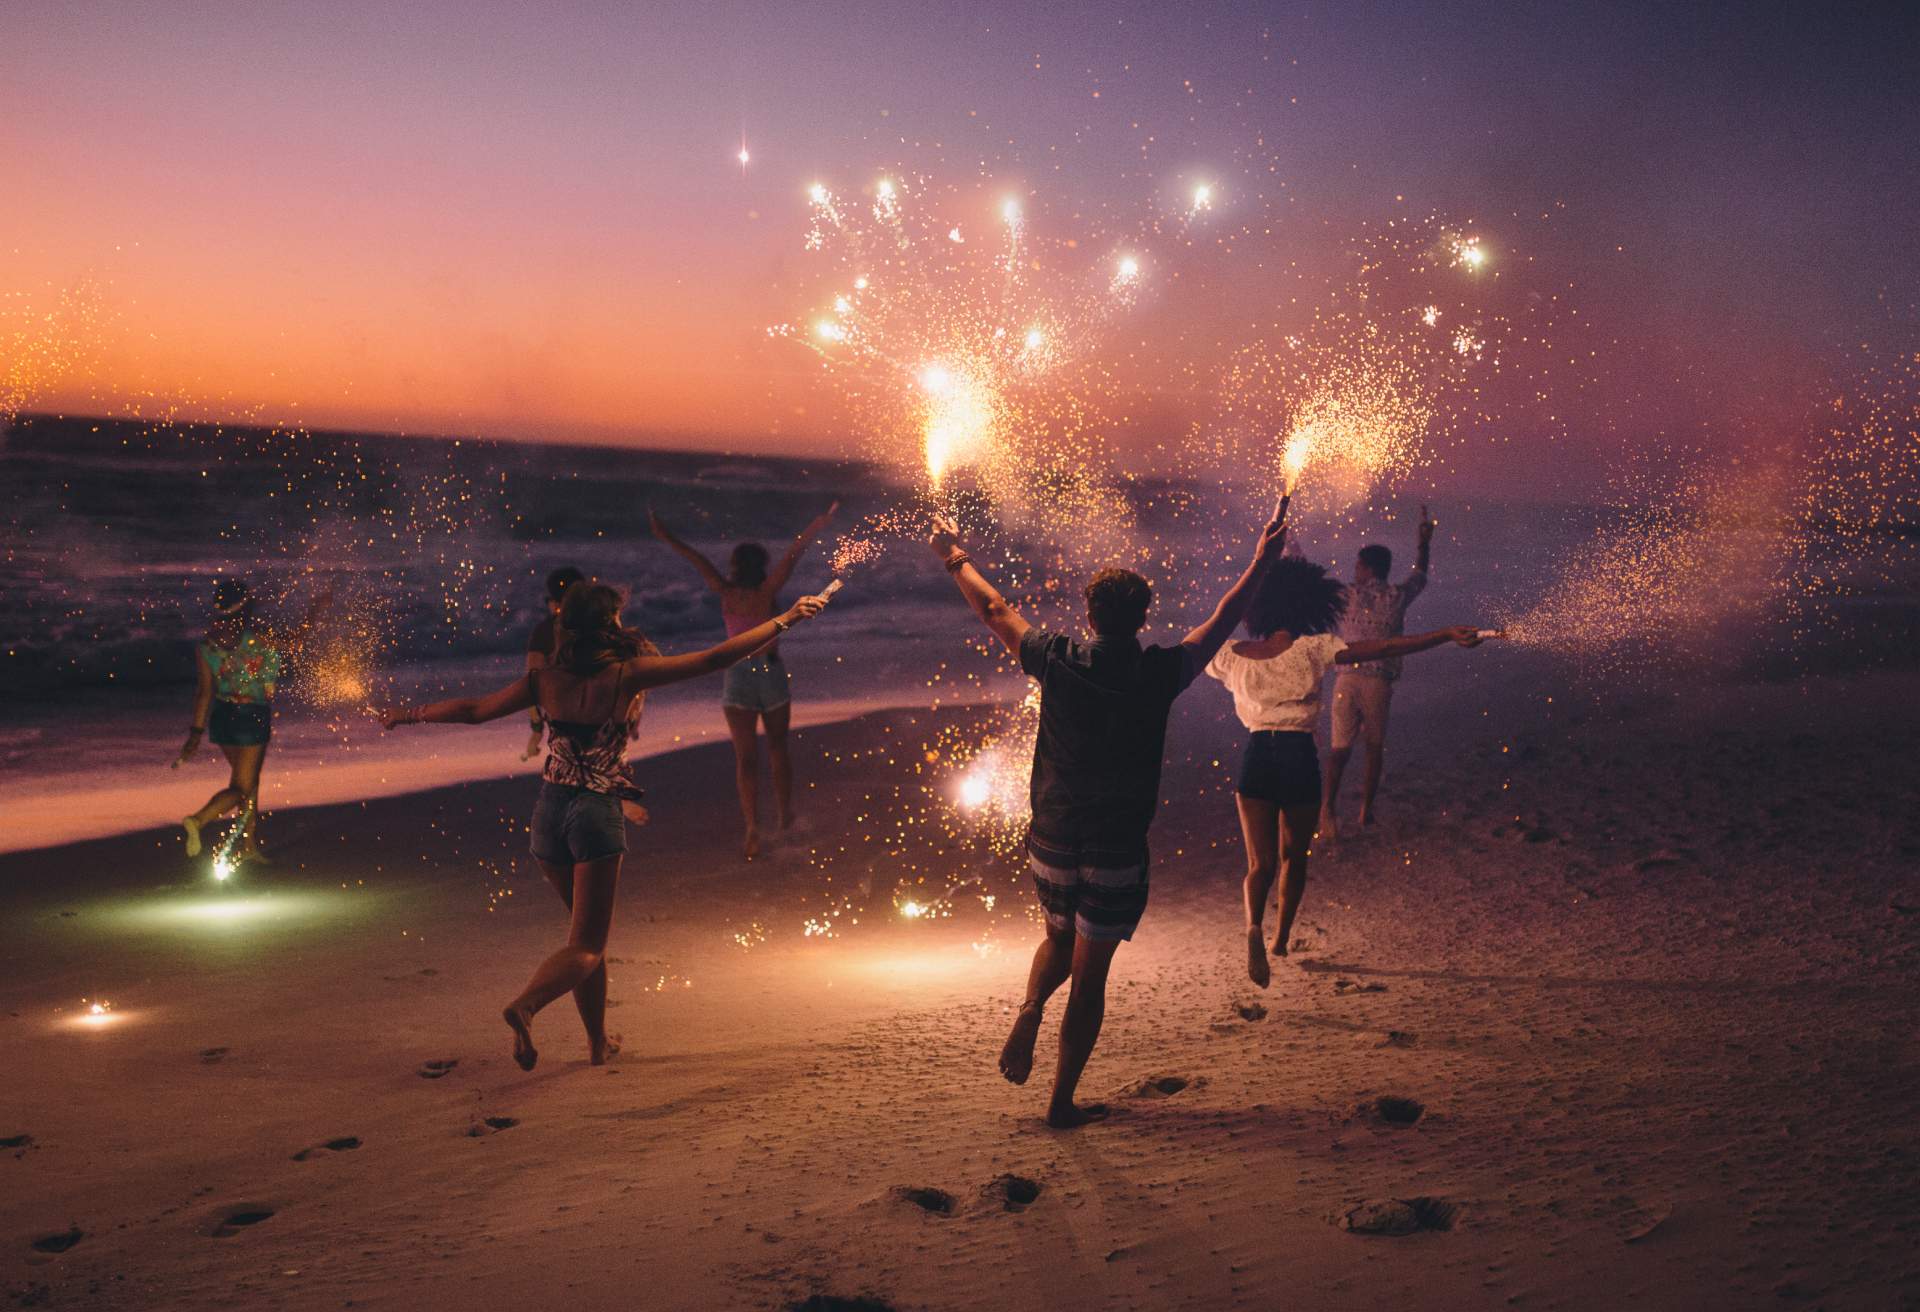 A group of people run with sparklers in their hands along the beach.